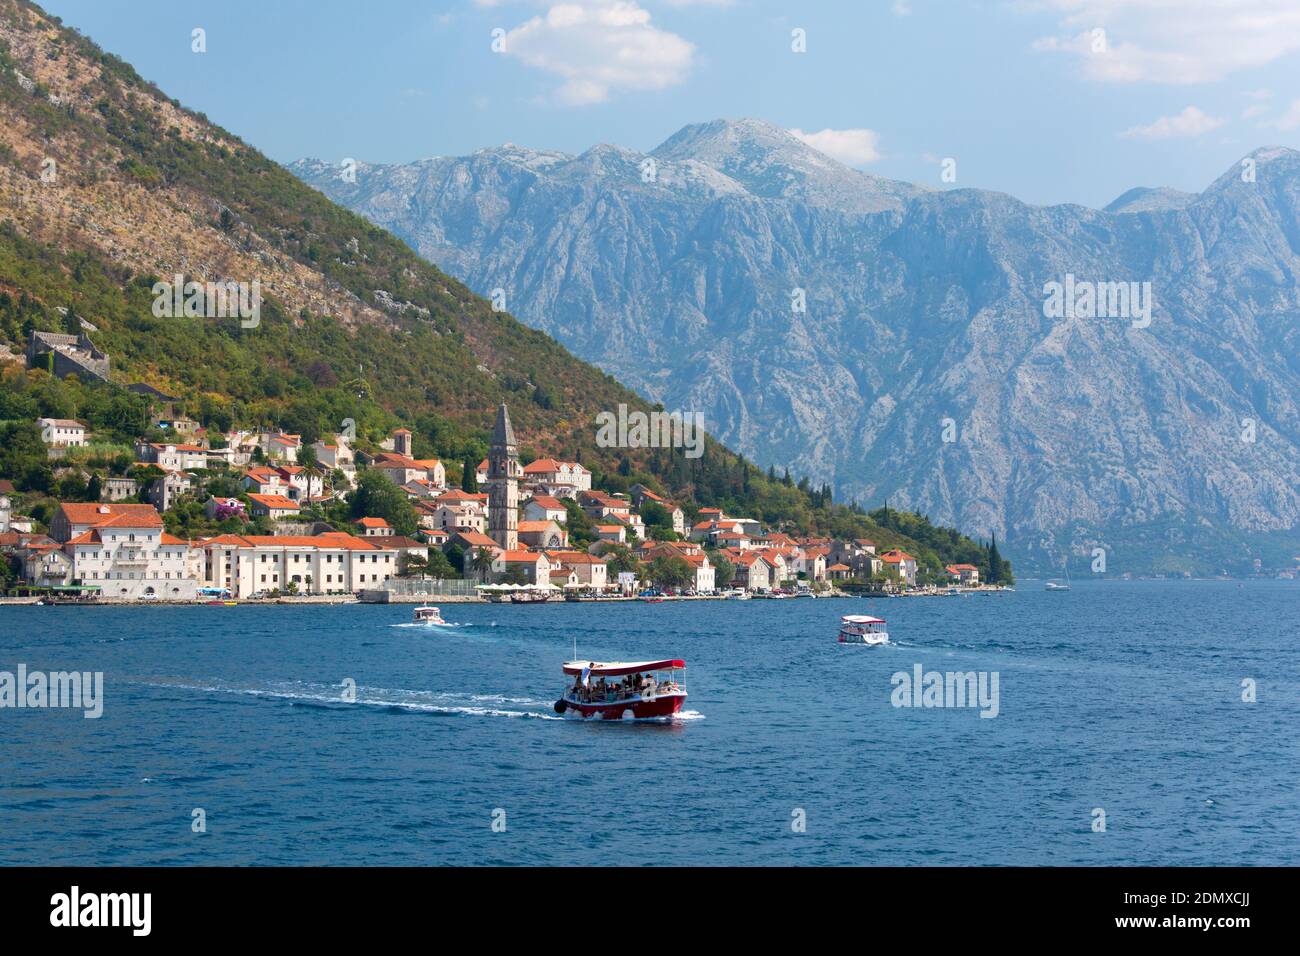 Perast, Kotor, Montenegro. Ferry boats shuttling tourists back and forth across the Bay of Kotor to the Church of Our Lady of the Rocks. Stock Photo